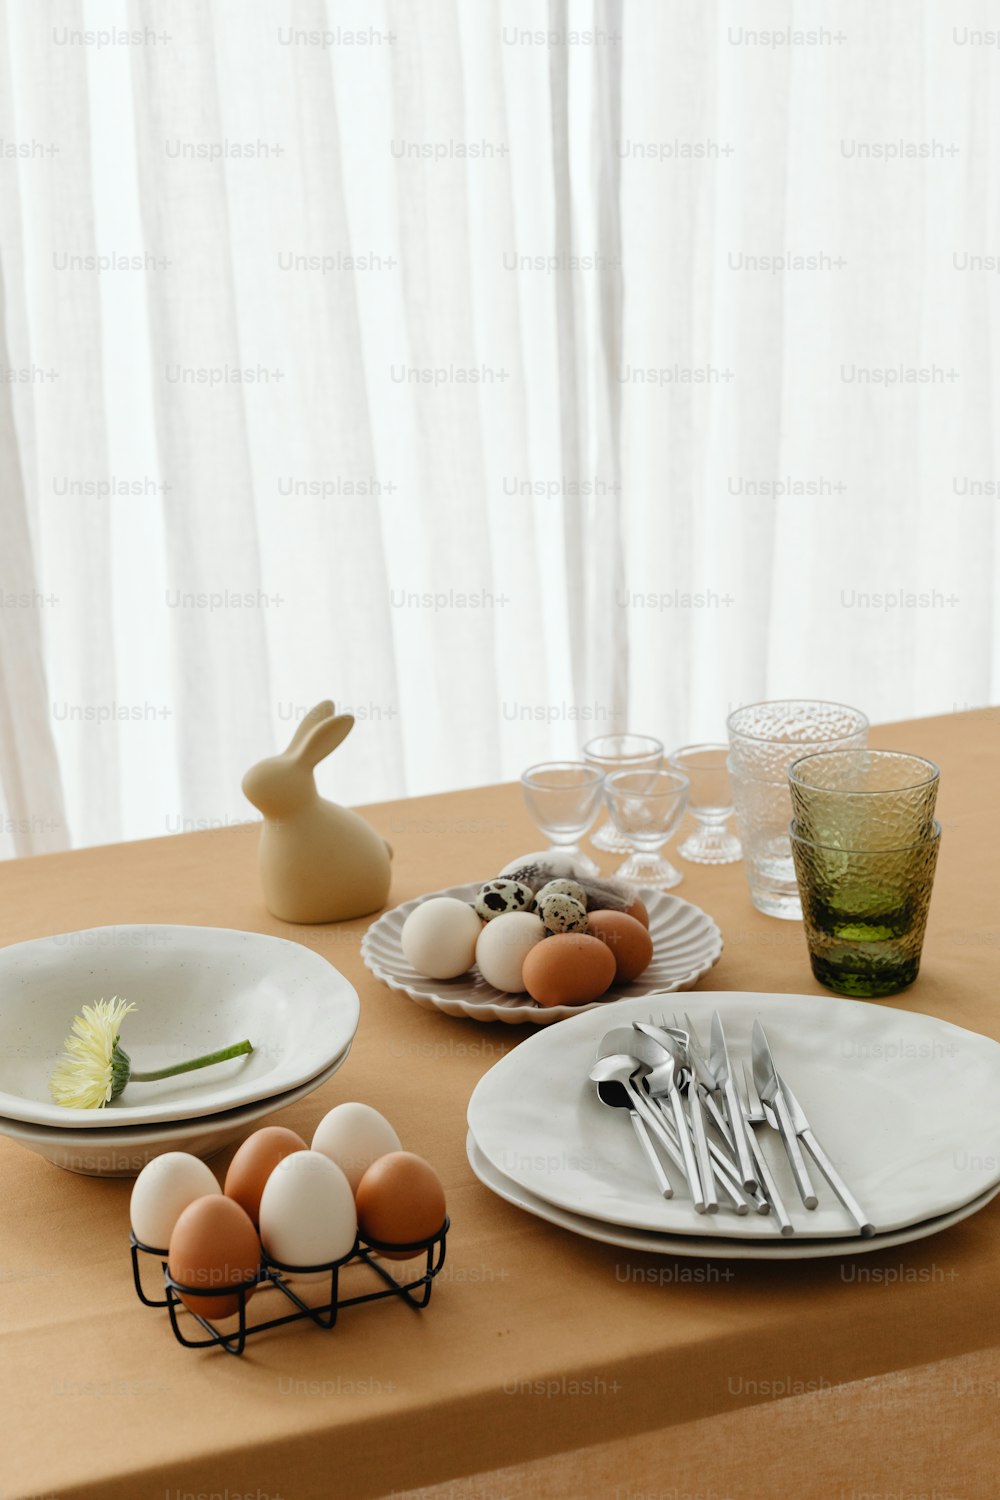 a table topped with plates and bowls filled with eggs